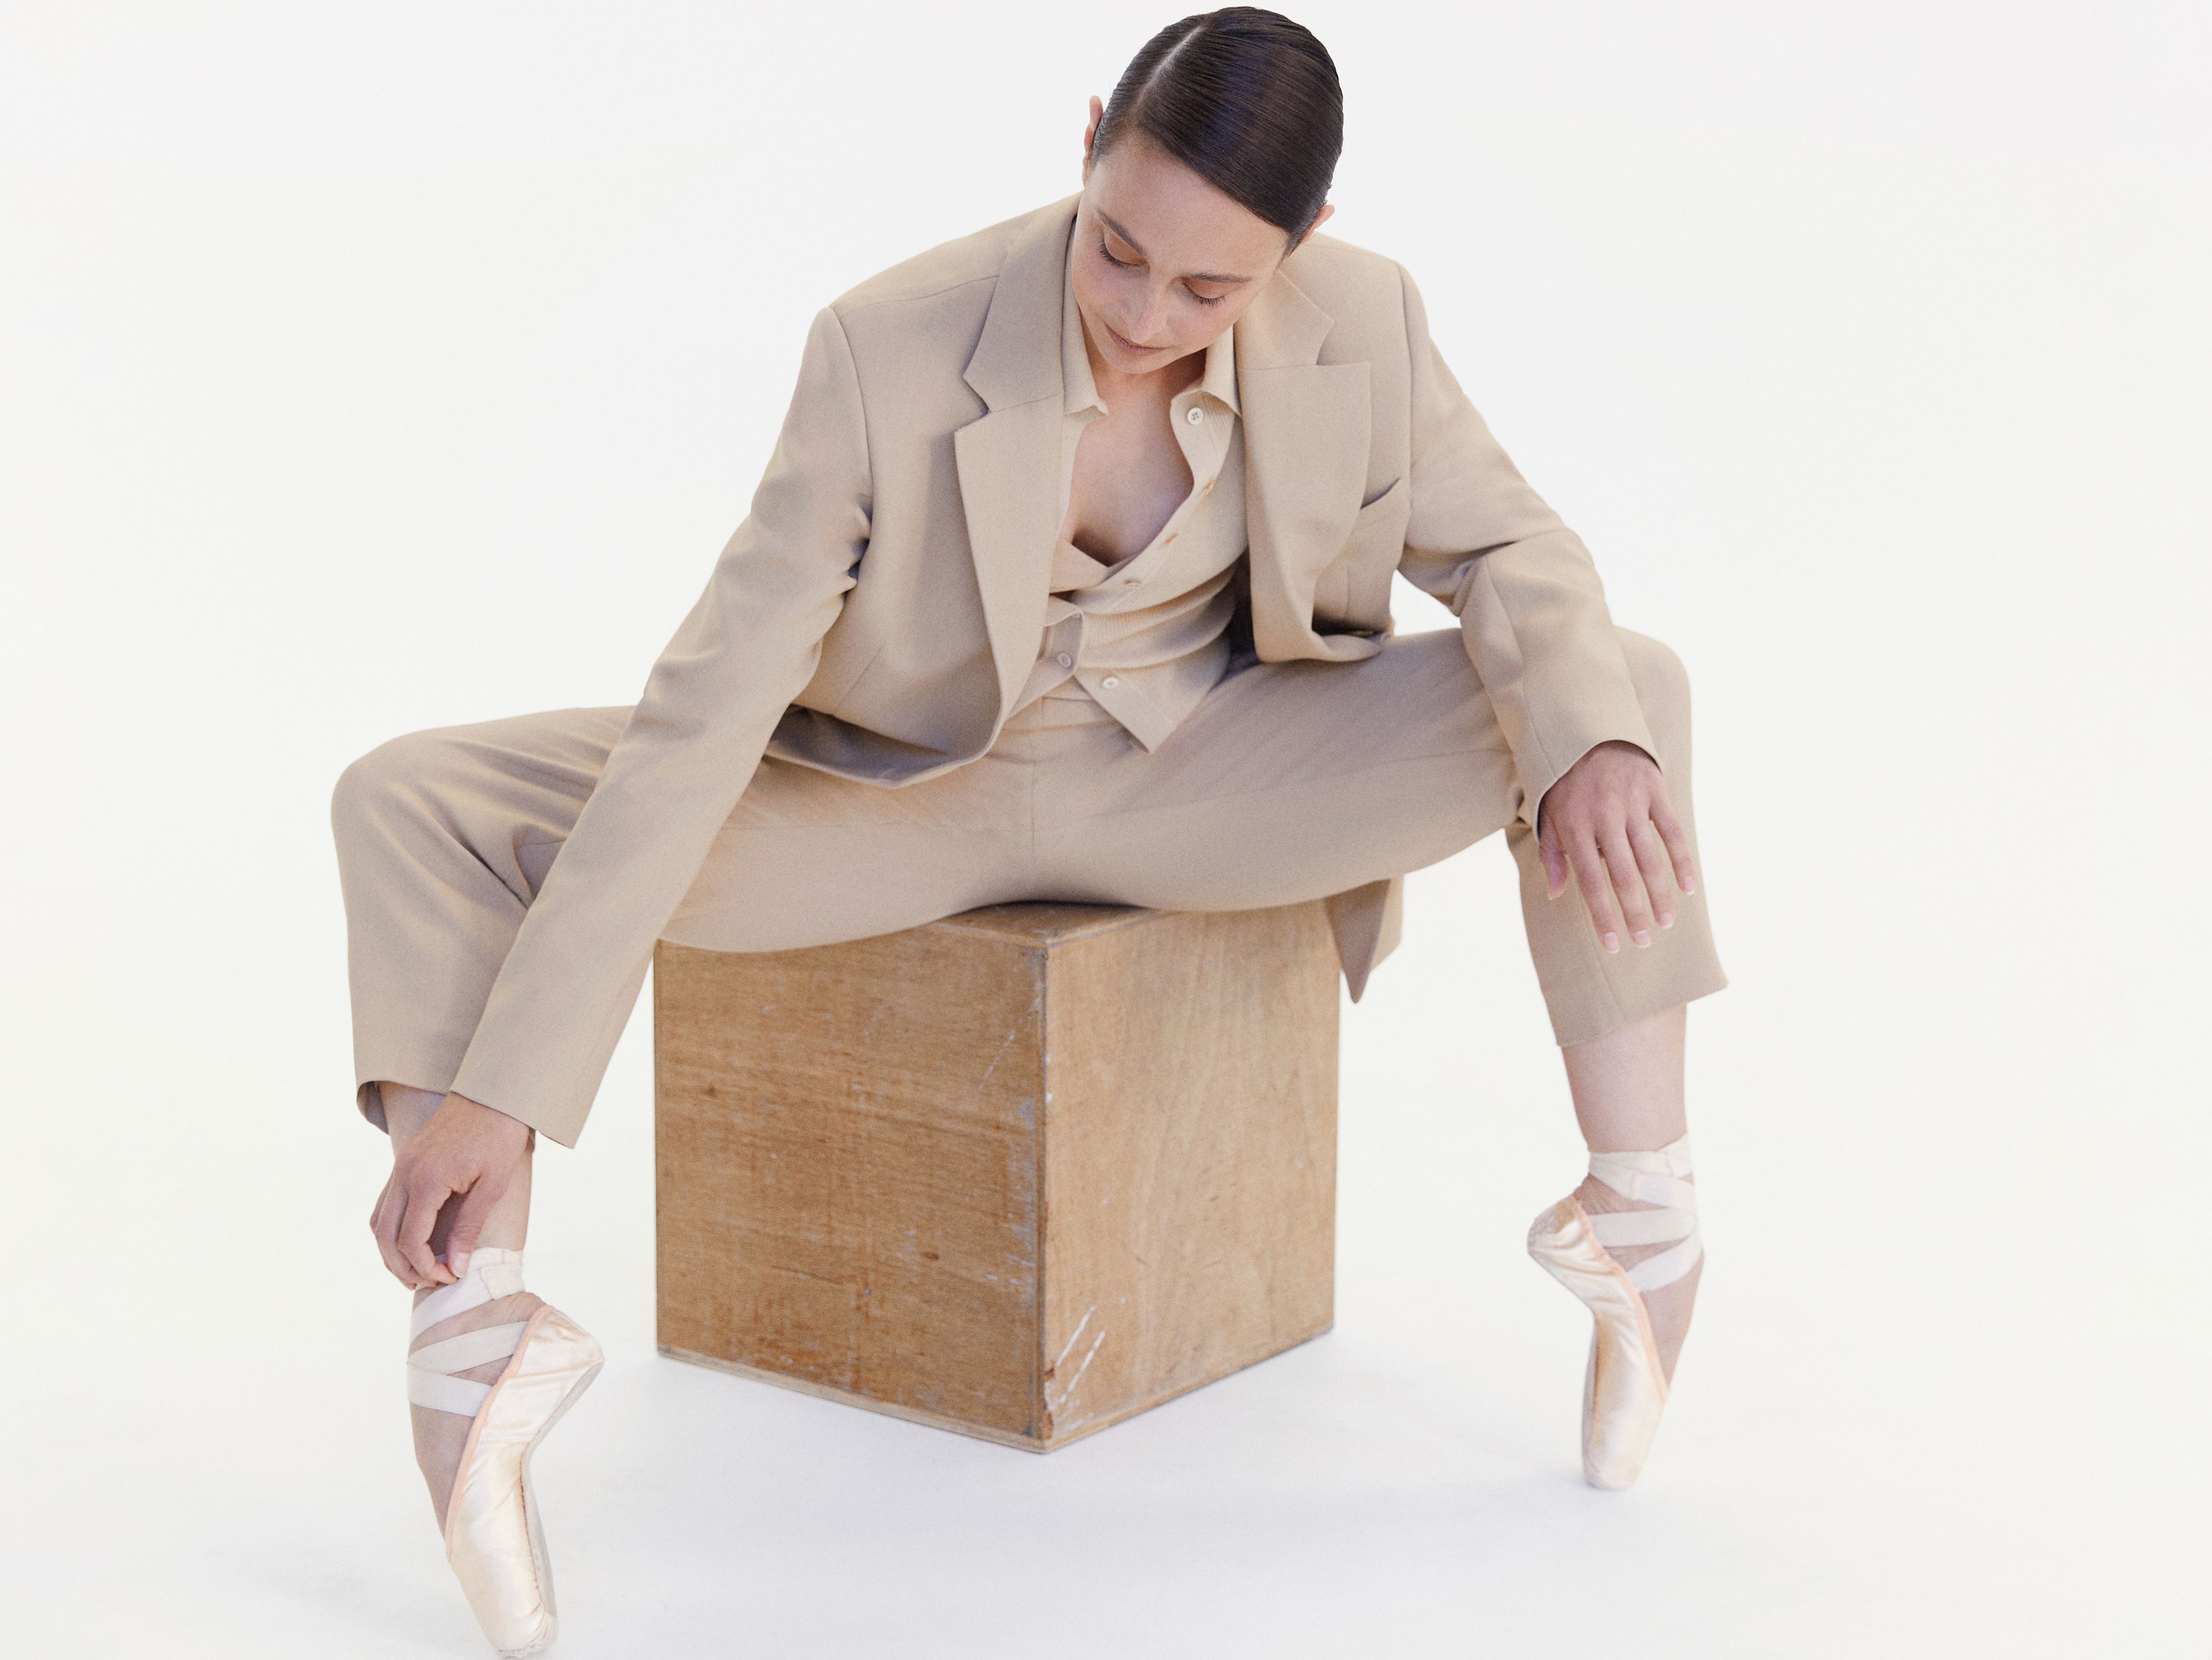 Dimity Azoury sitting on a beige cube stool wearing a beige suit and pointe ballet shoes